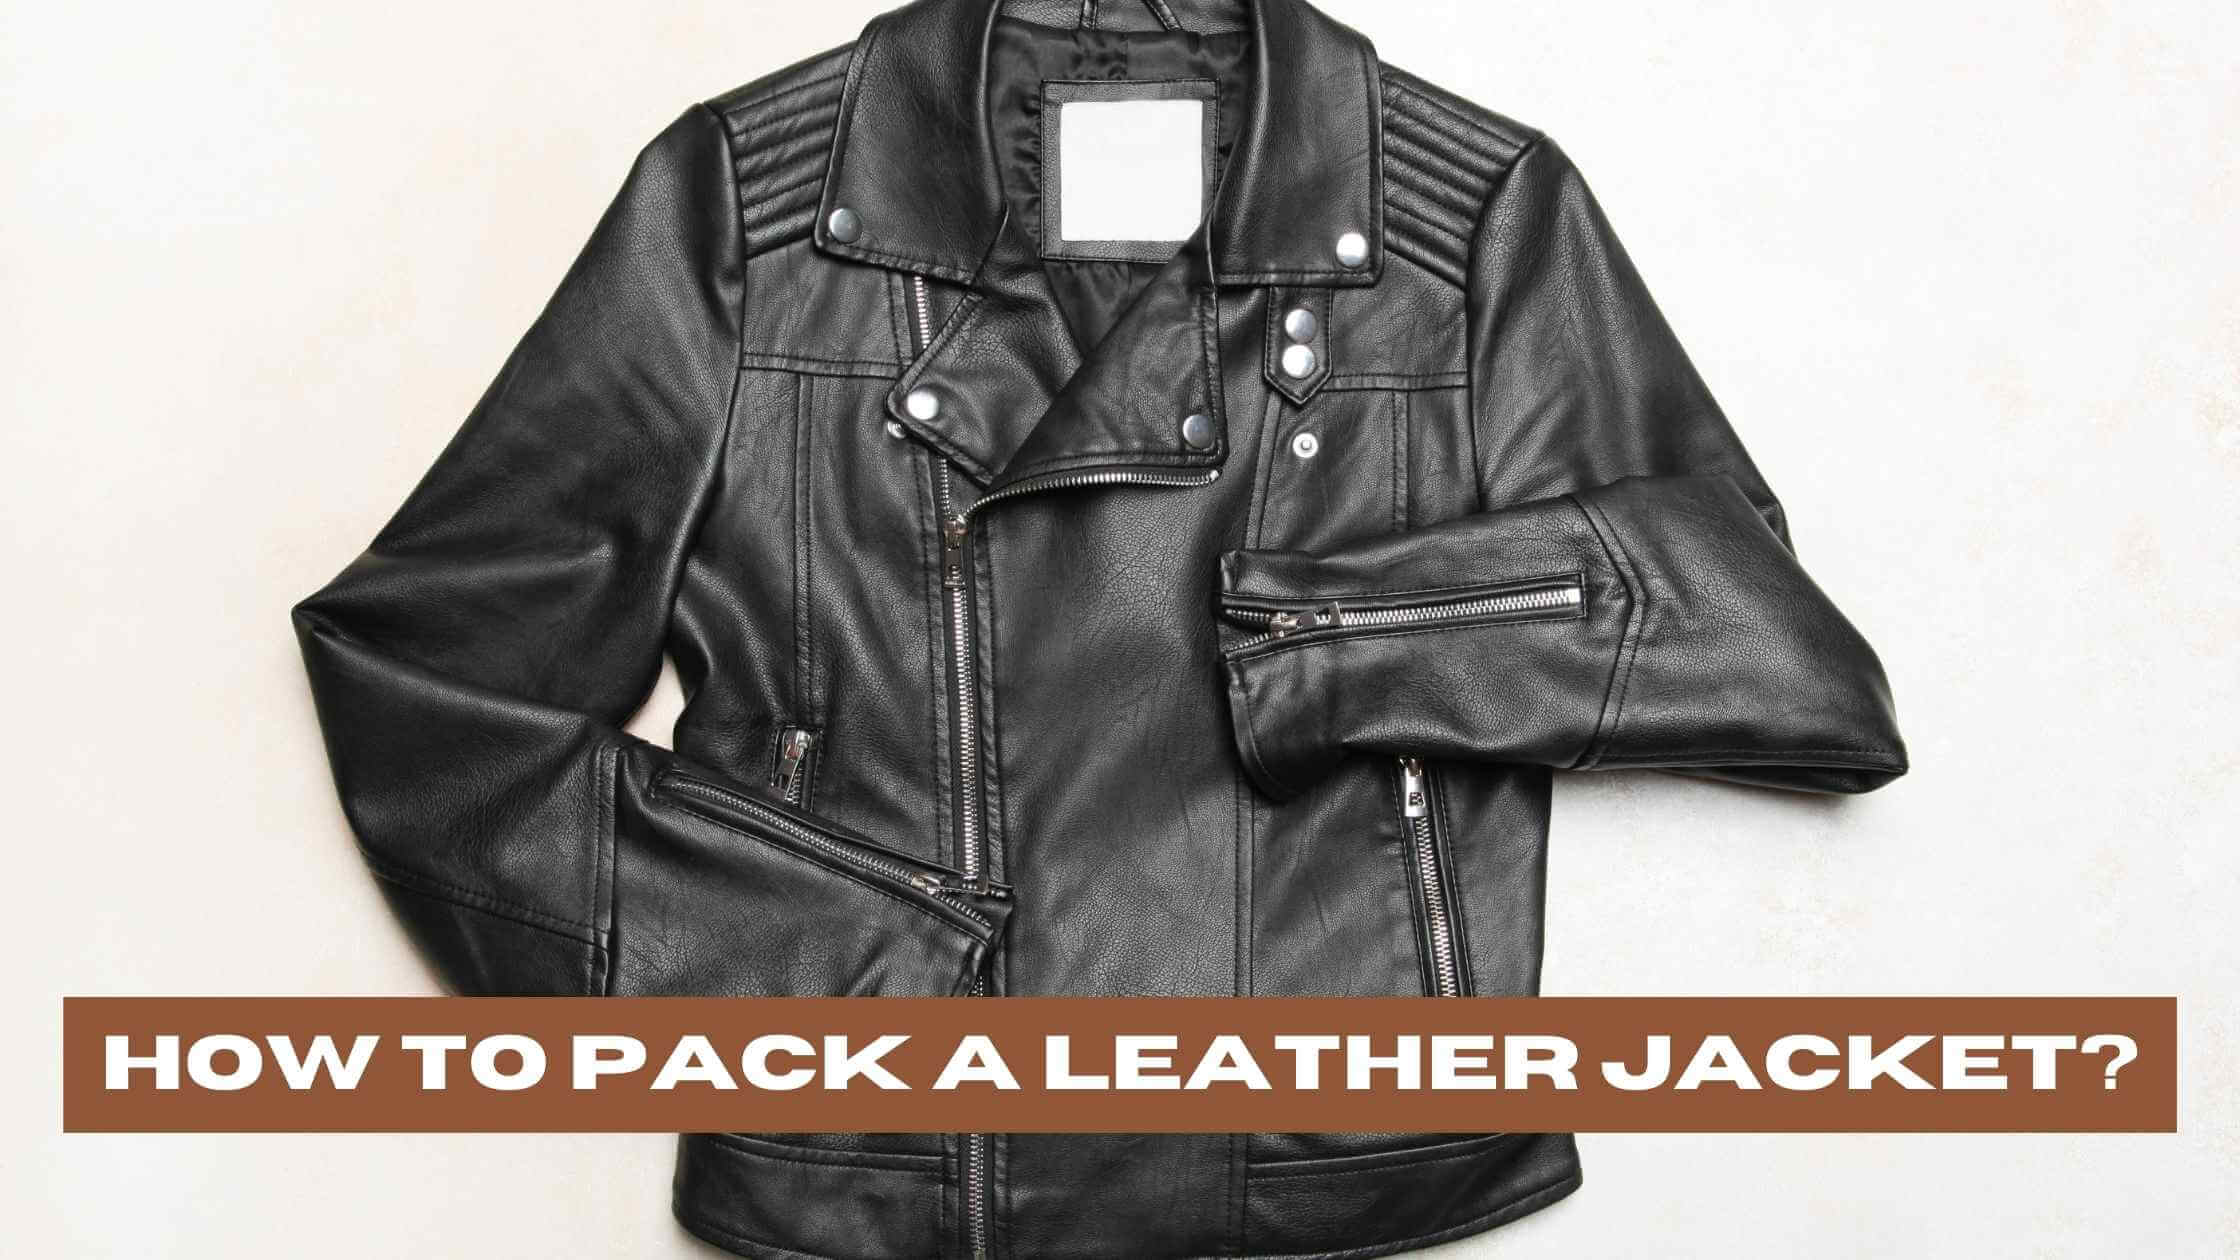 How to Pack a Leather Jacket